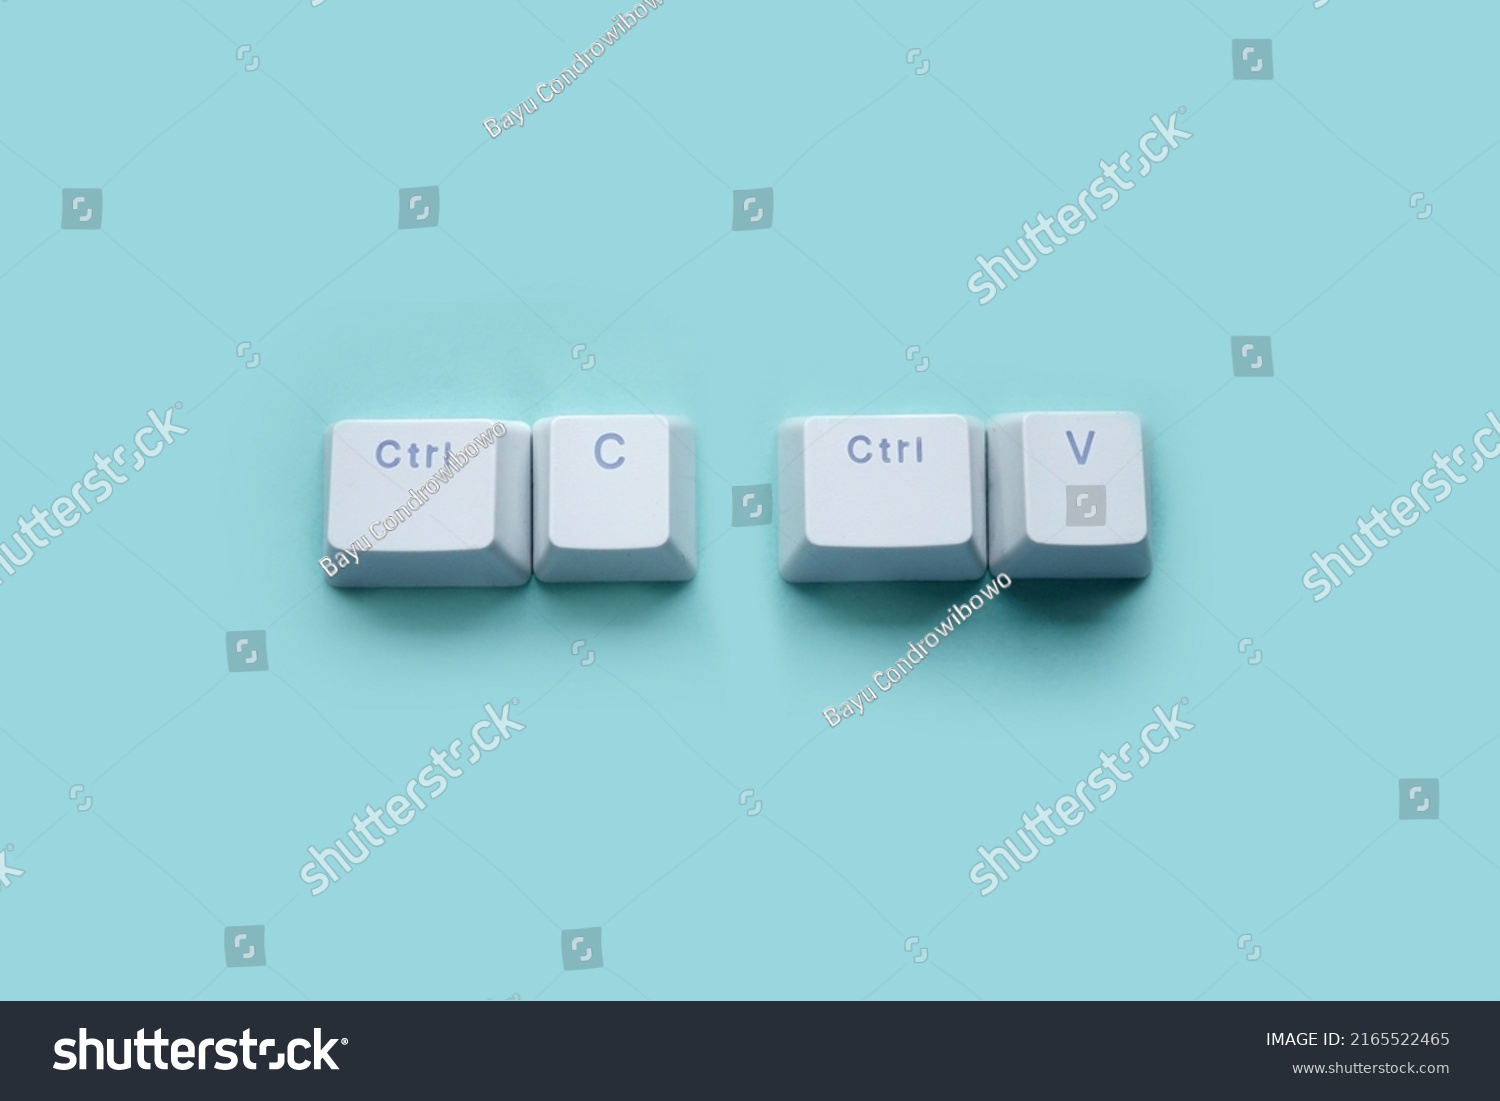 Ctrl C, Ctrl V keyboard buttons, copy and paste key shortcut isolated on a blue background. #2165522465